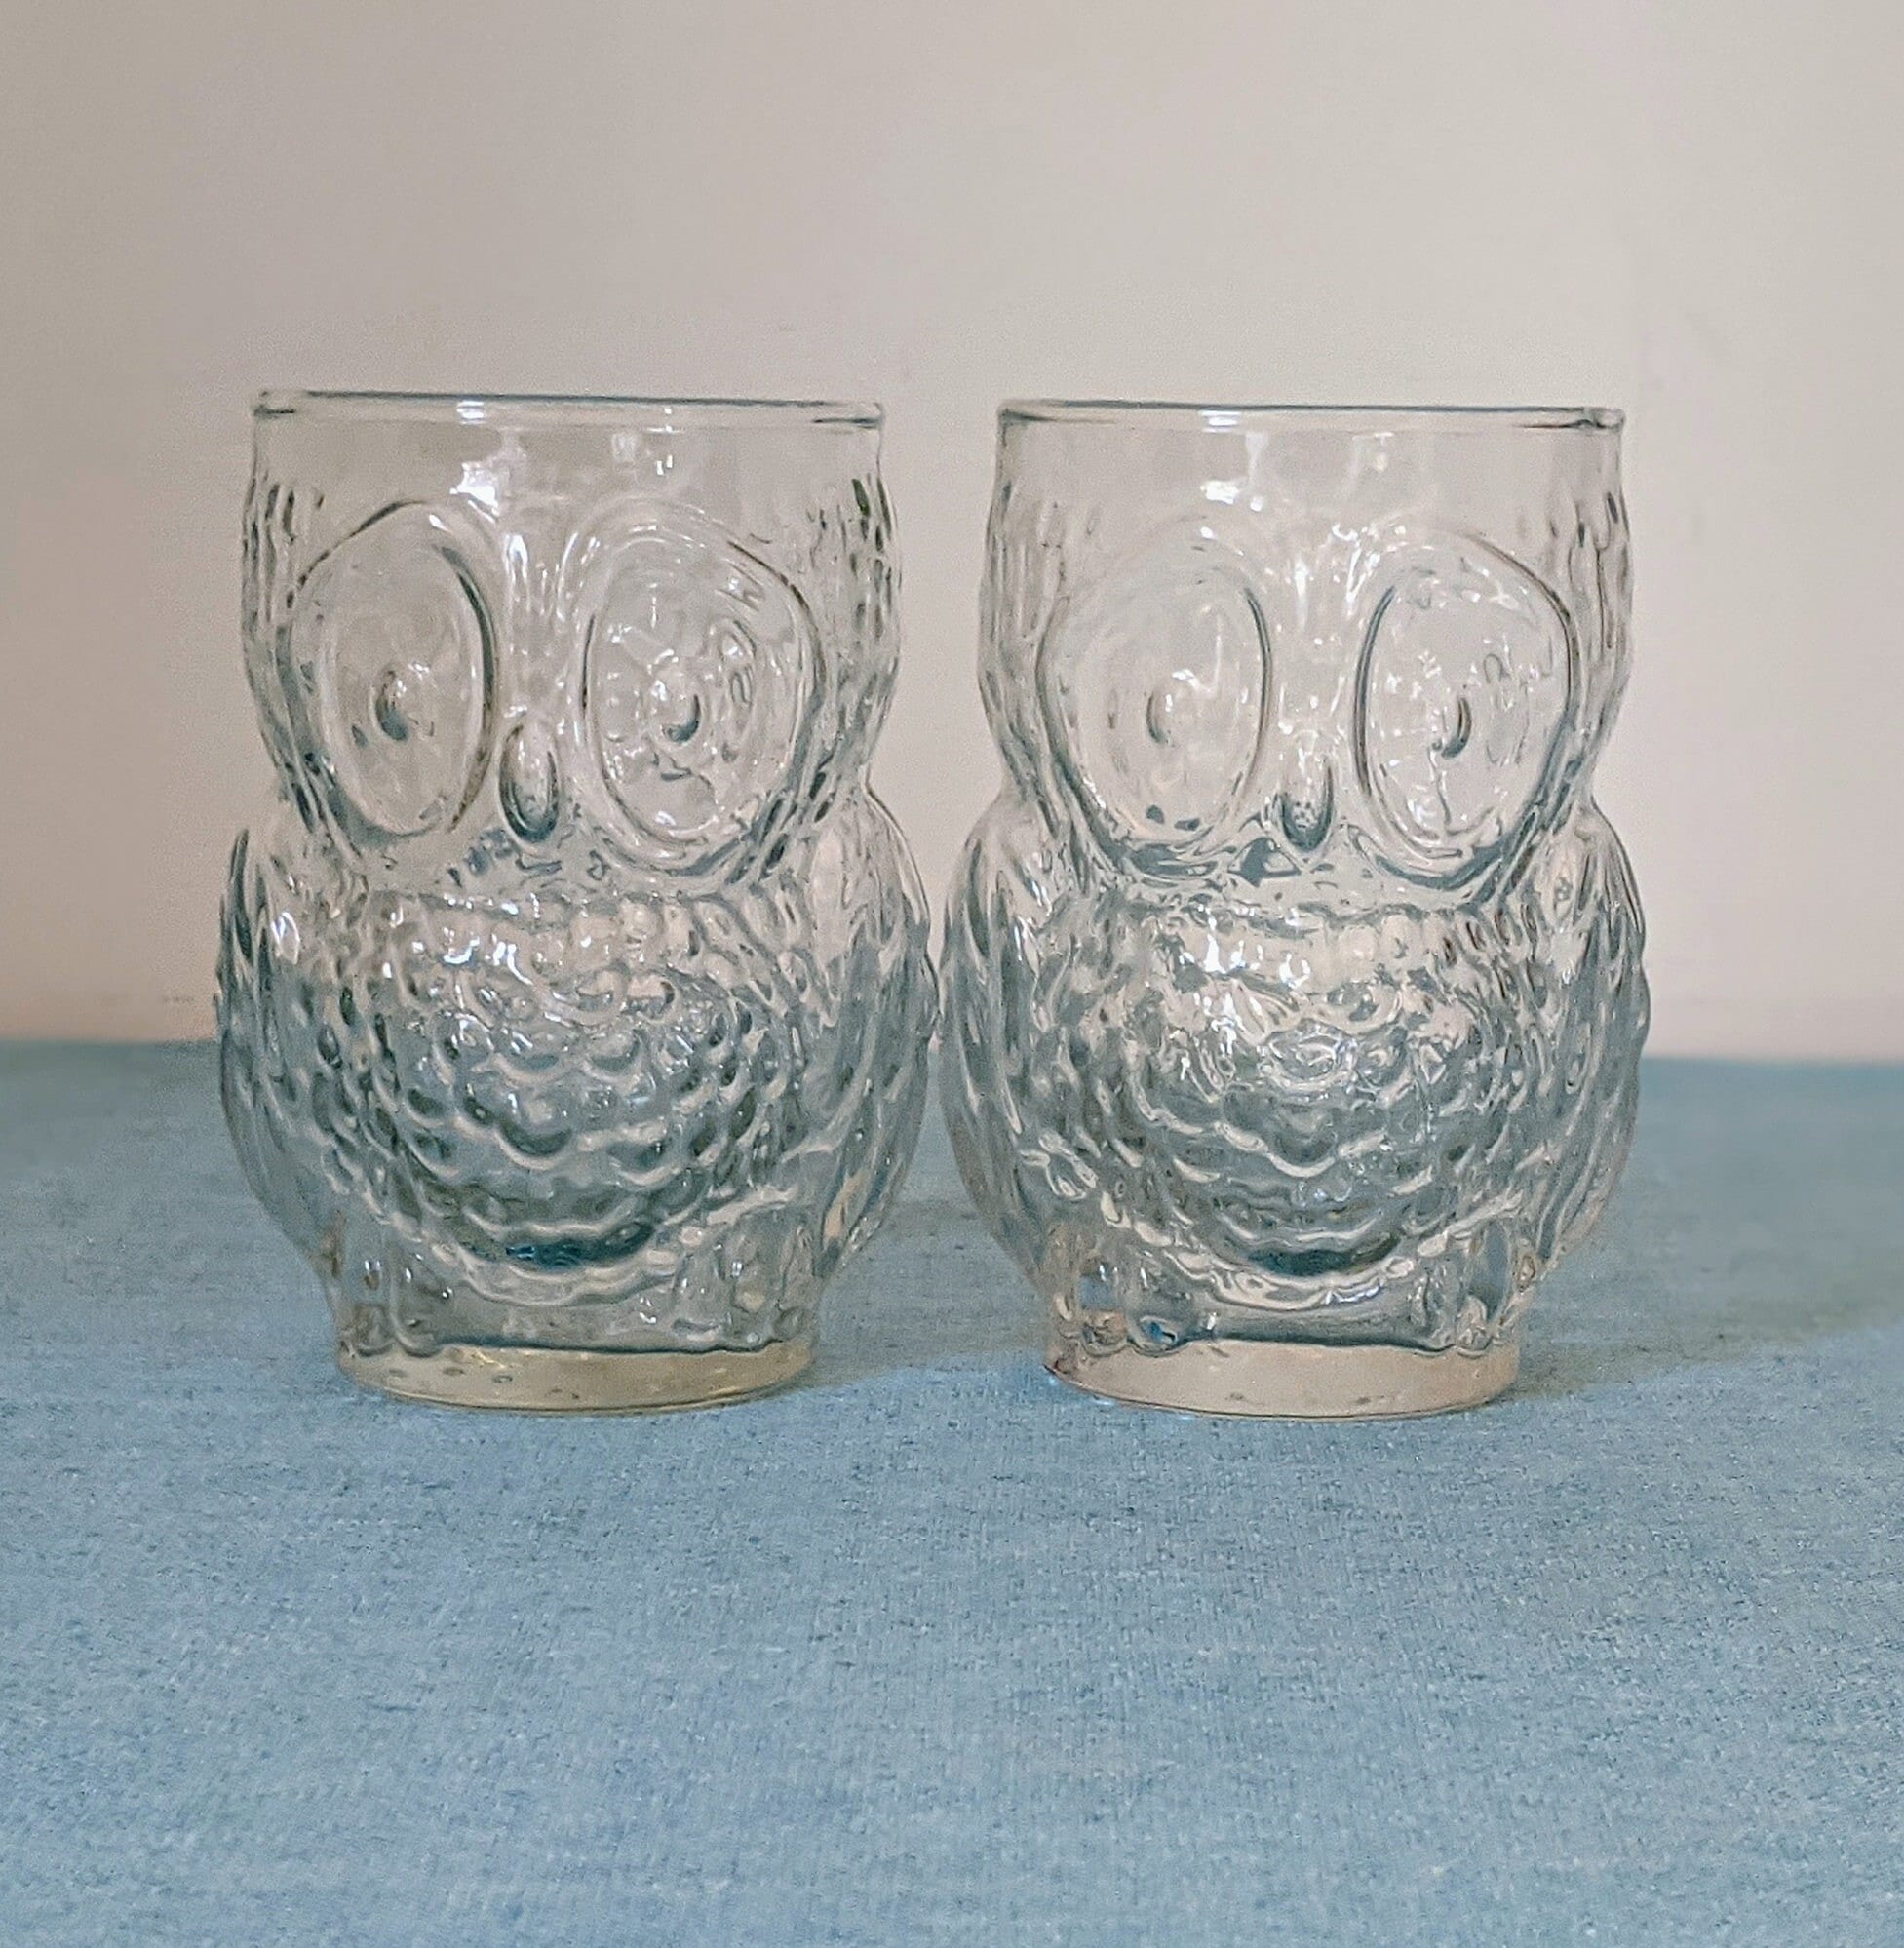 ALAMHI Owl Glass Cups Cute Mugs, Vintage Glassware sets of 2 Drinking  Glasses, Can Shaped Glass Cups…See more ALAMHI Owl Glass Cups Cute Mugs,  Vintage